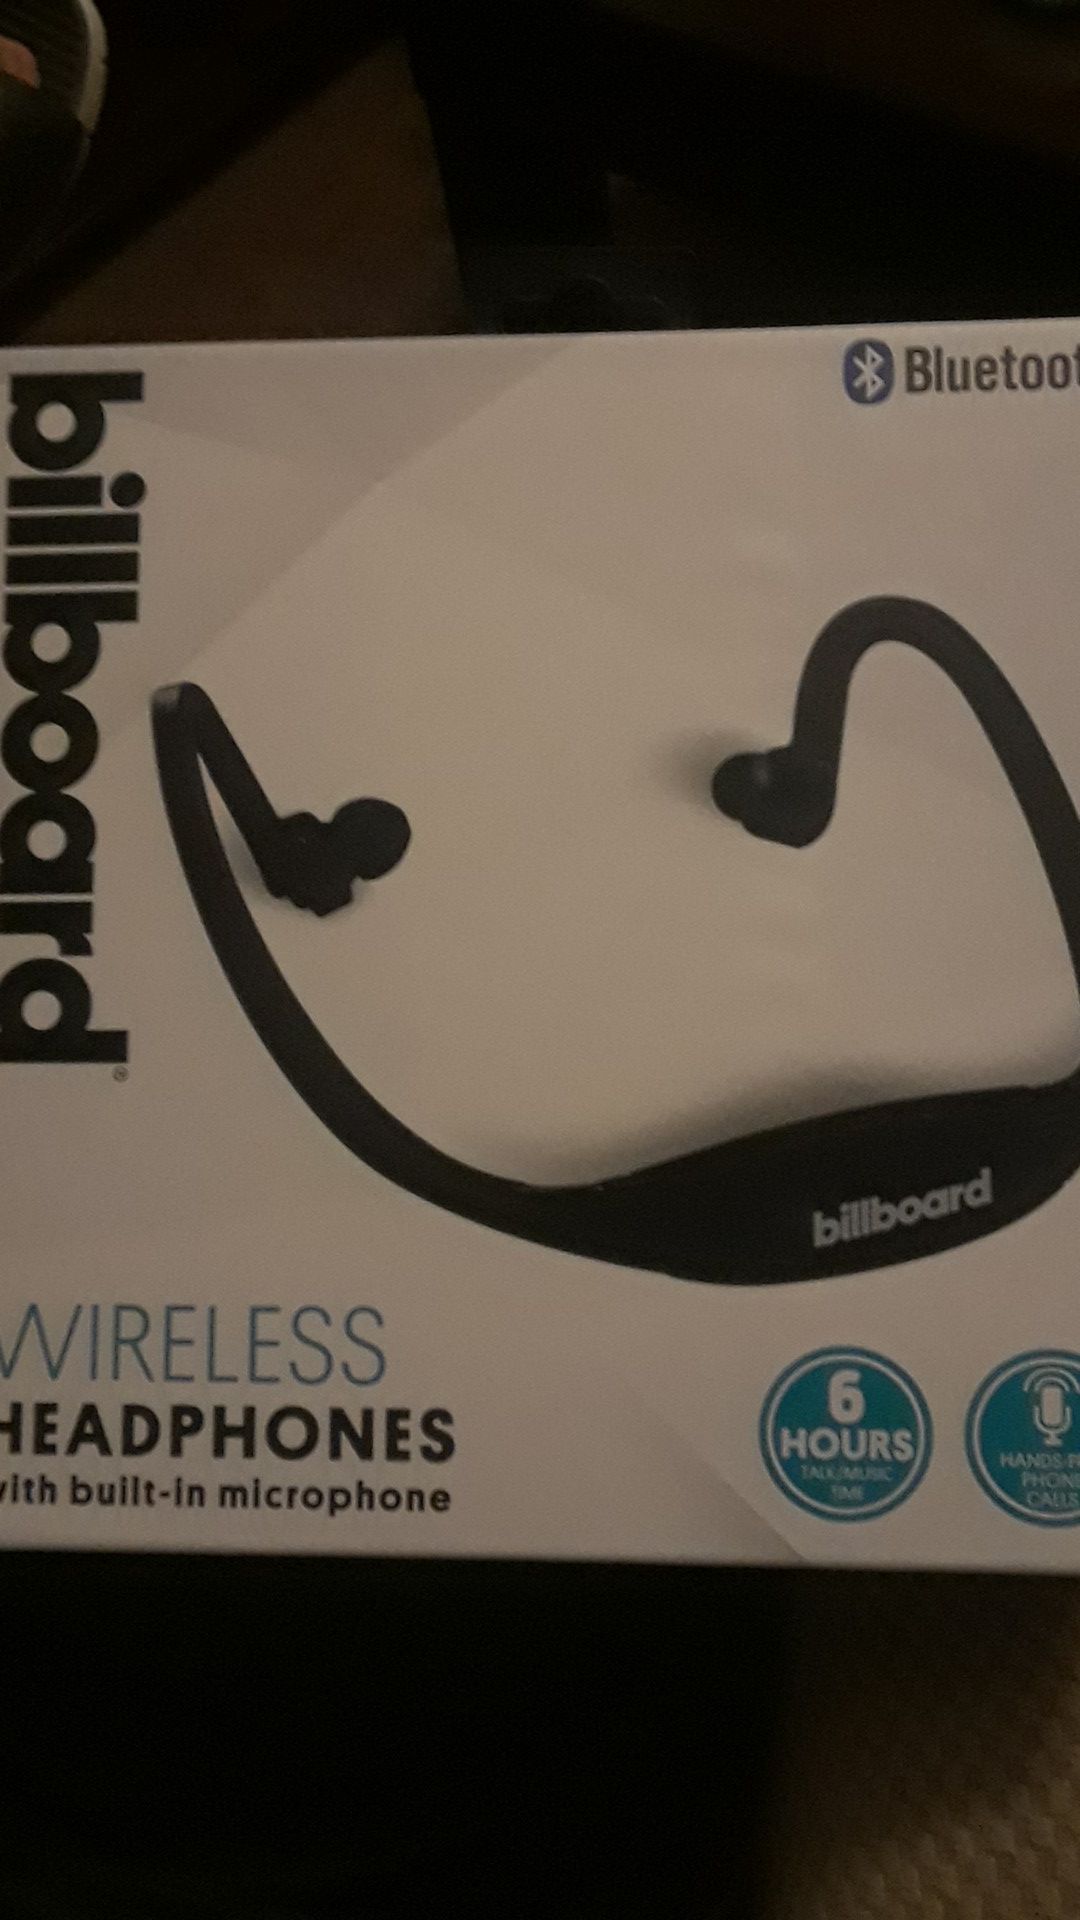 Wireless Headphones with Built-In Microphone